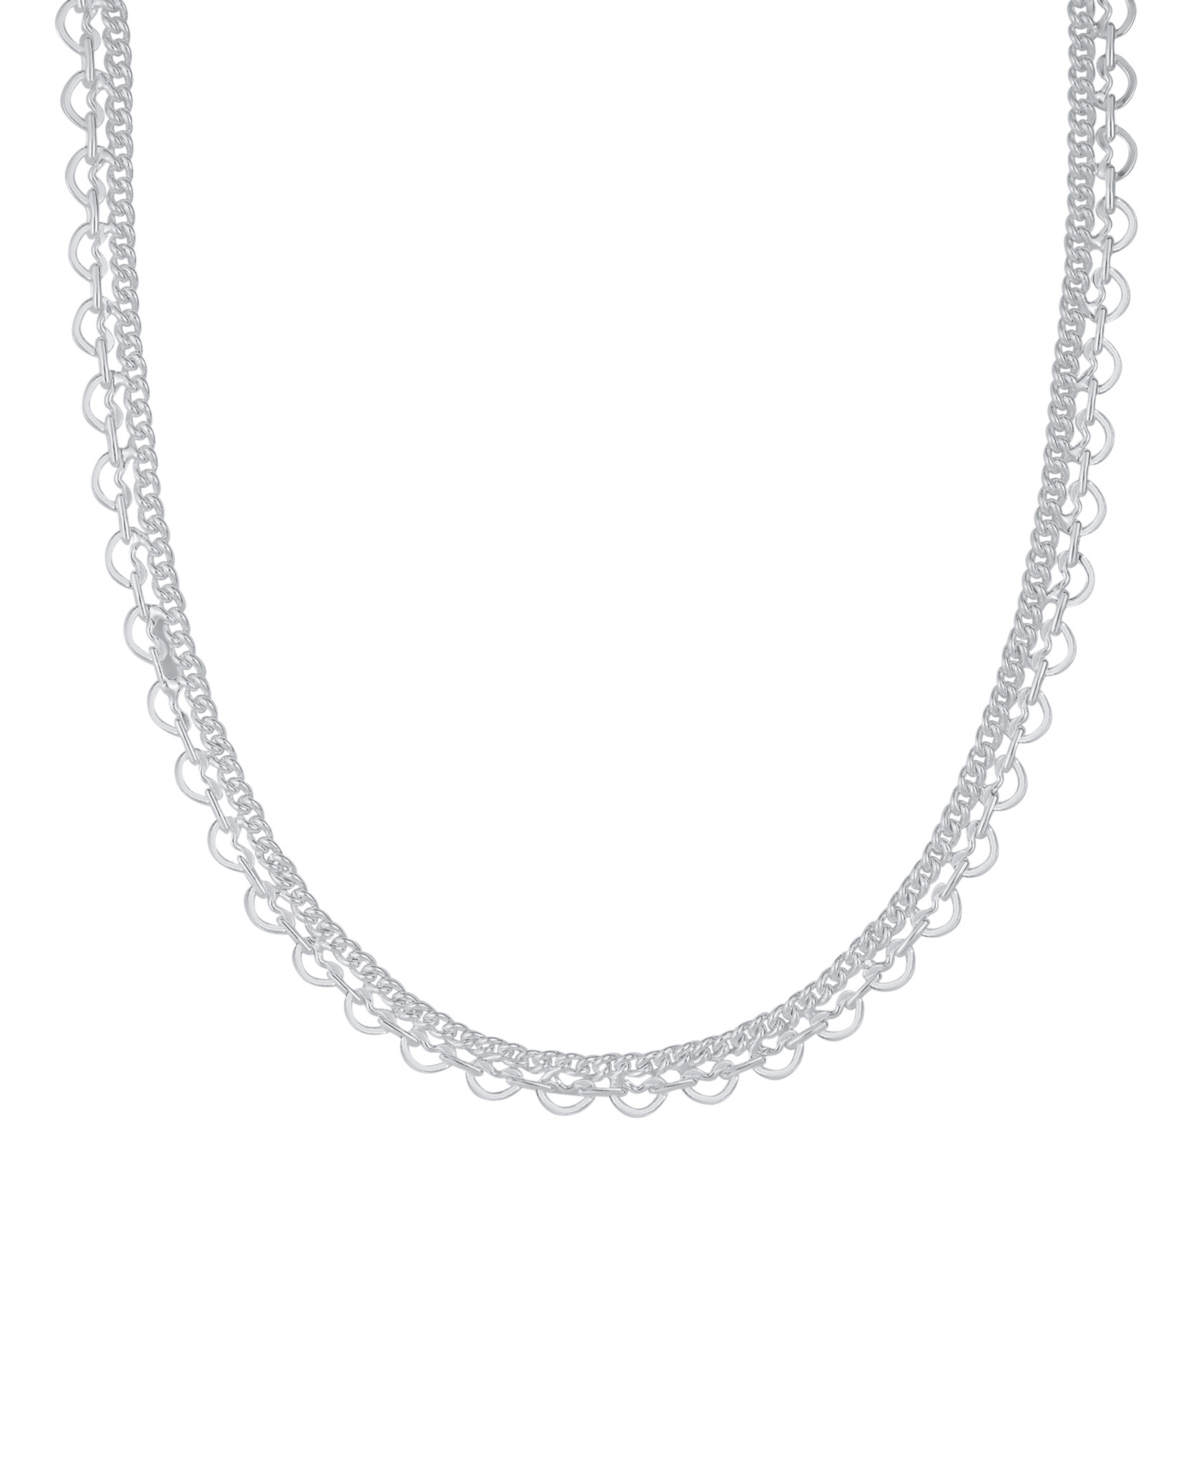 Silver Plated Heart Curb Linked Necklace - Silver